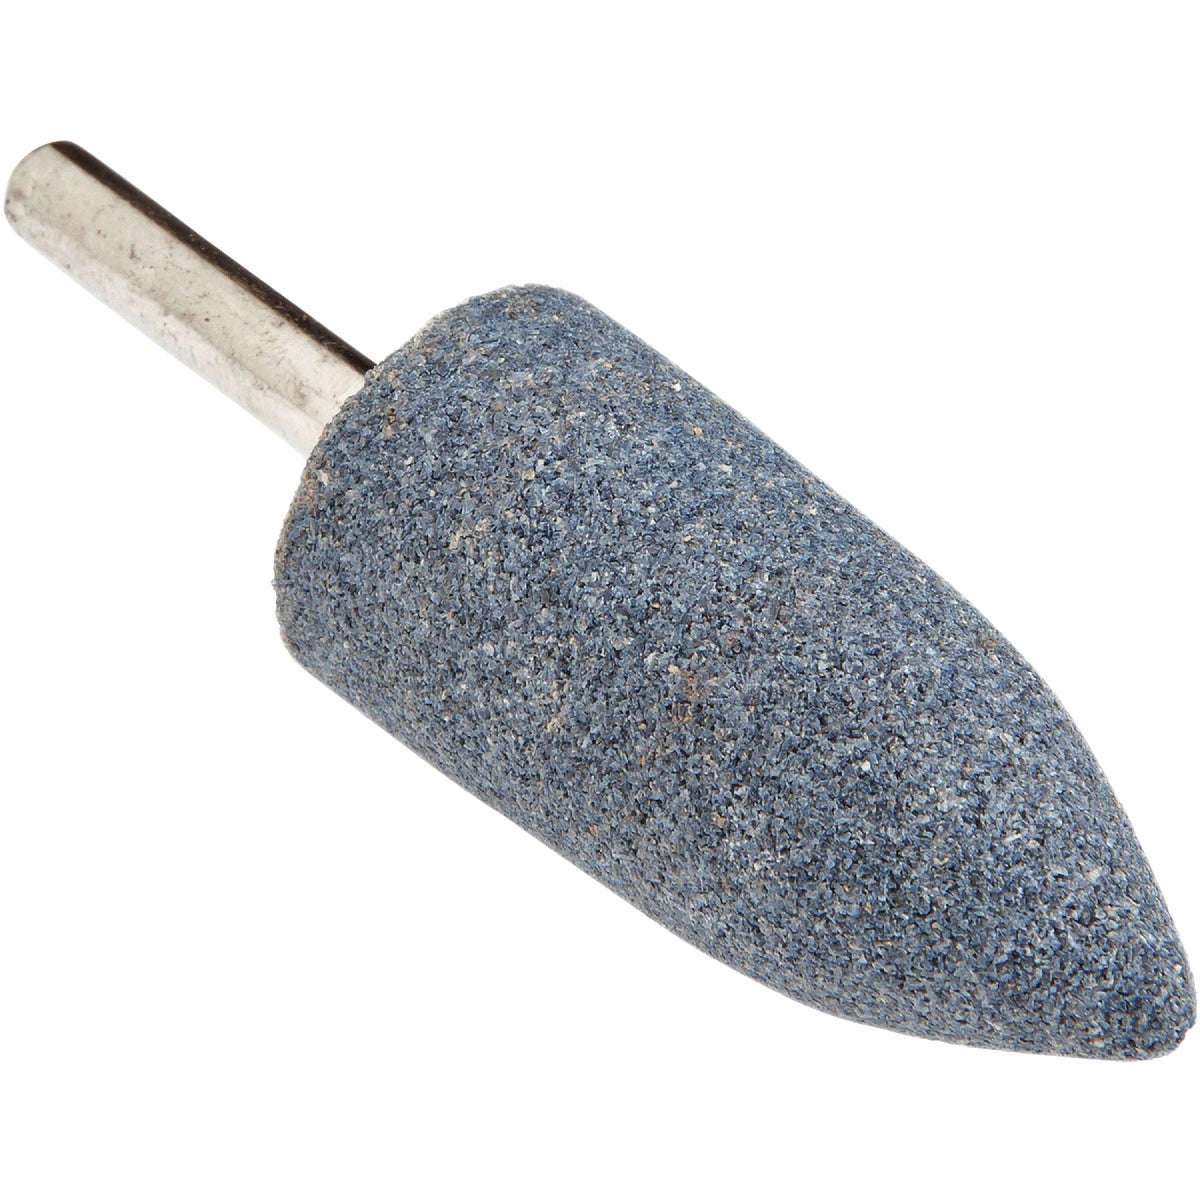 Forney Mounted Point, A11 2 In. x 7/8 In. Grinding Stone